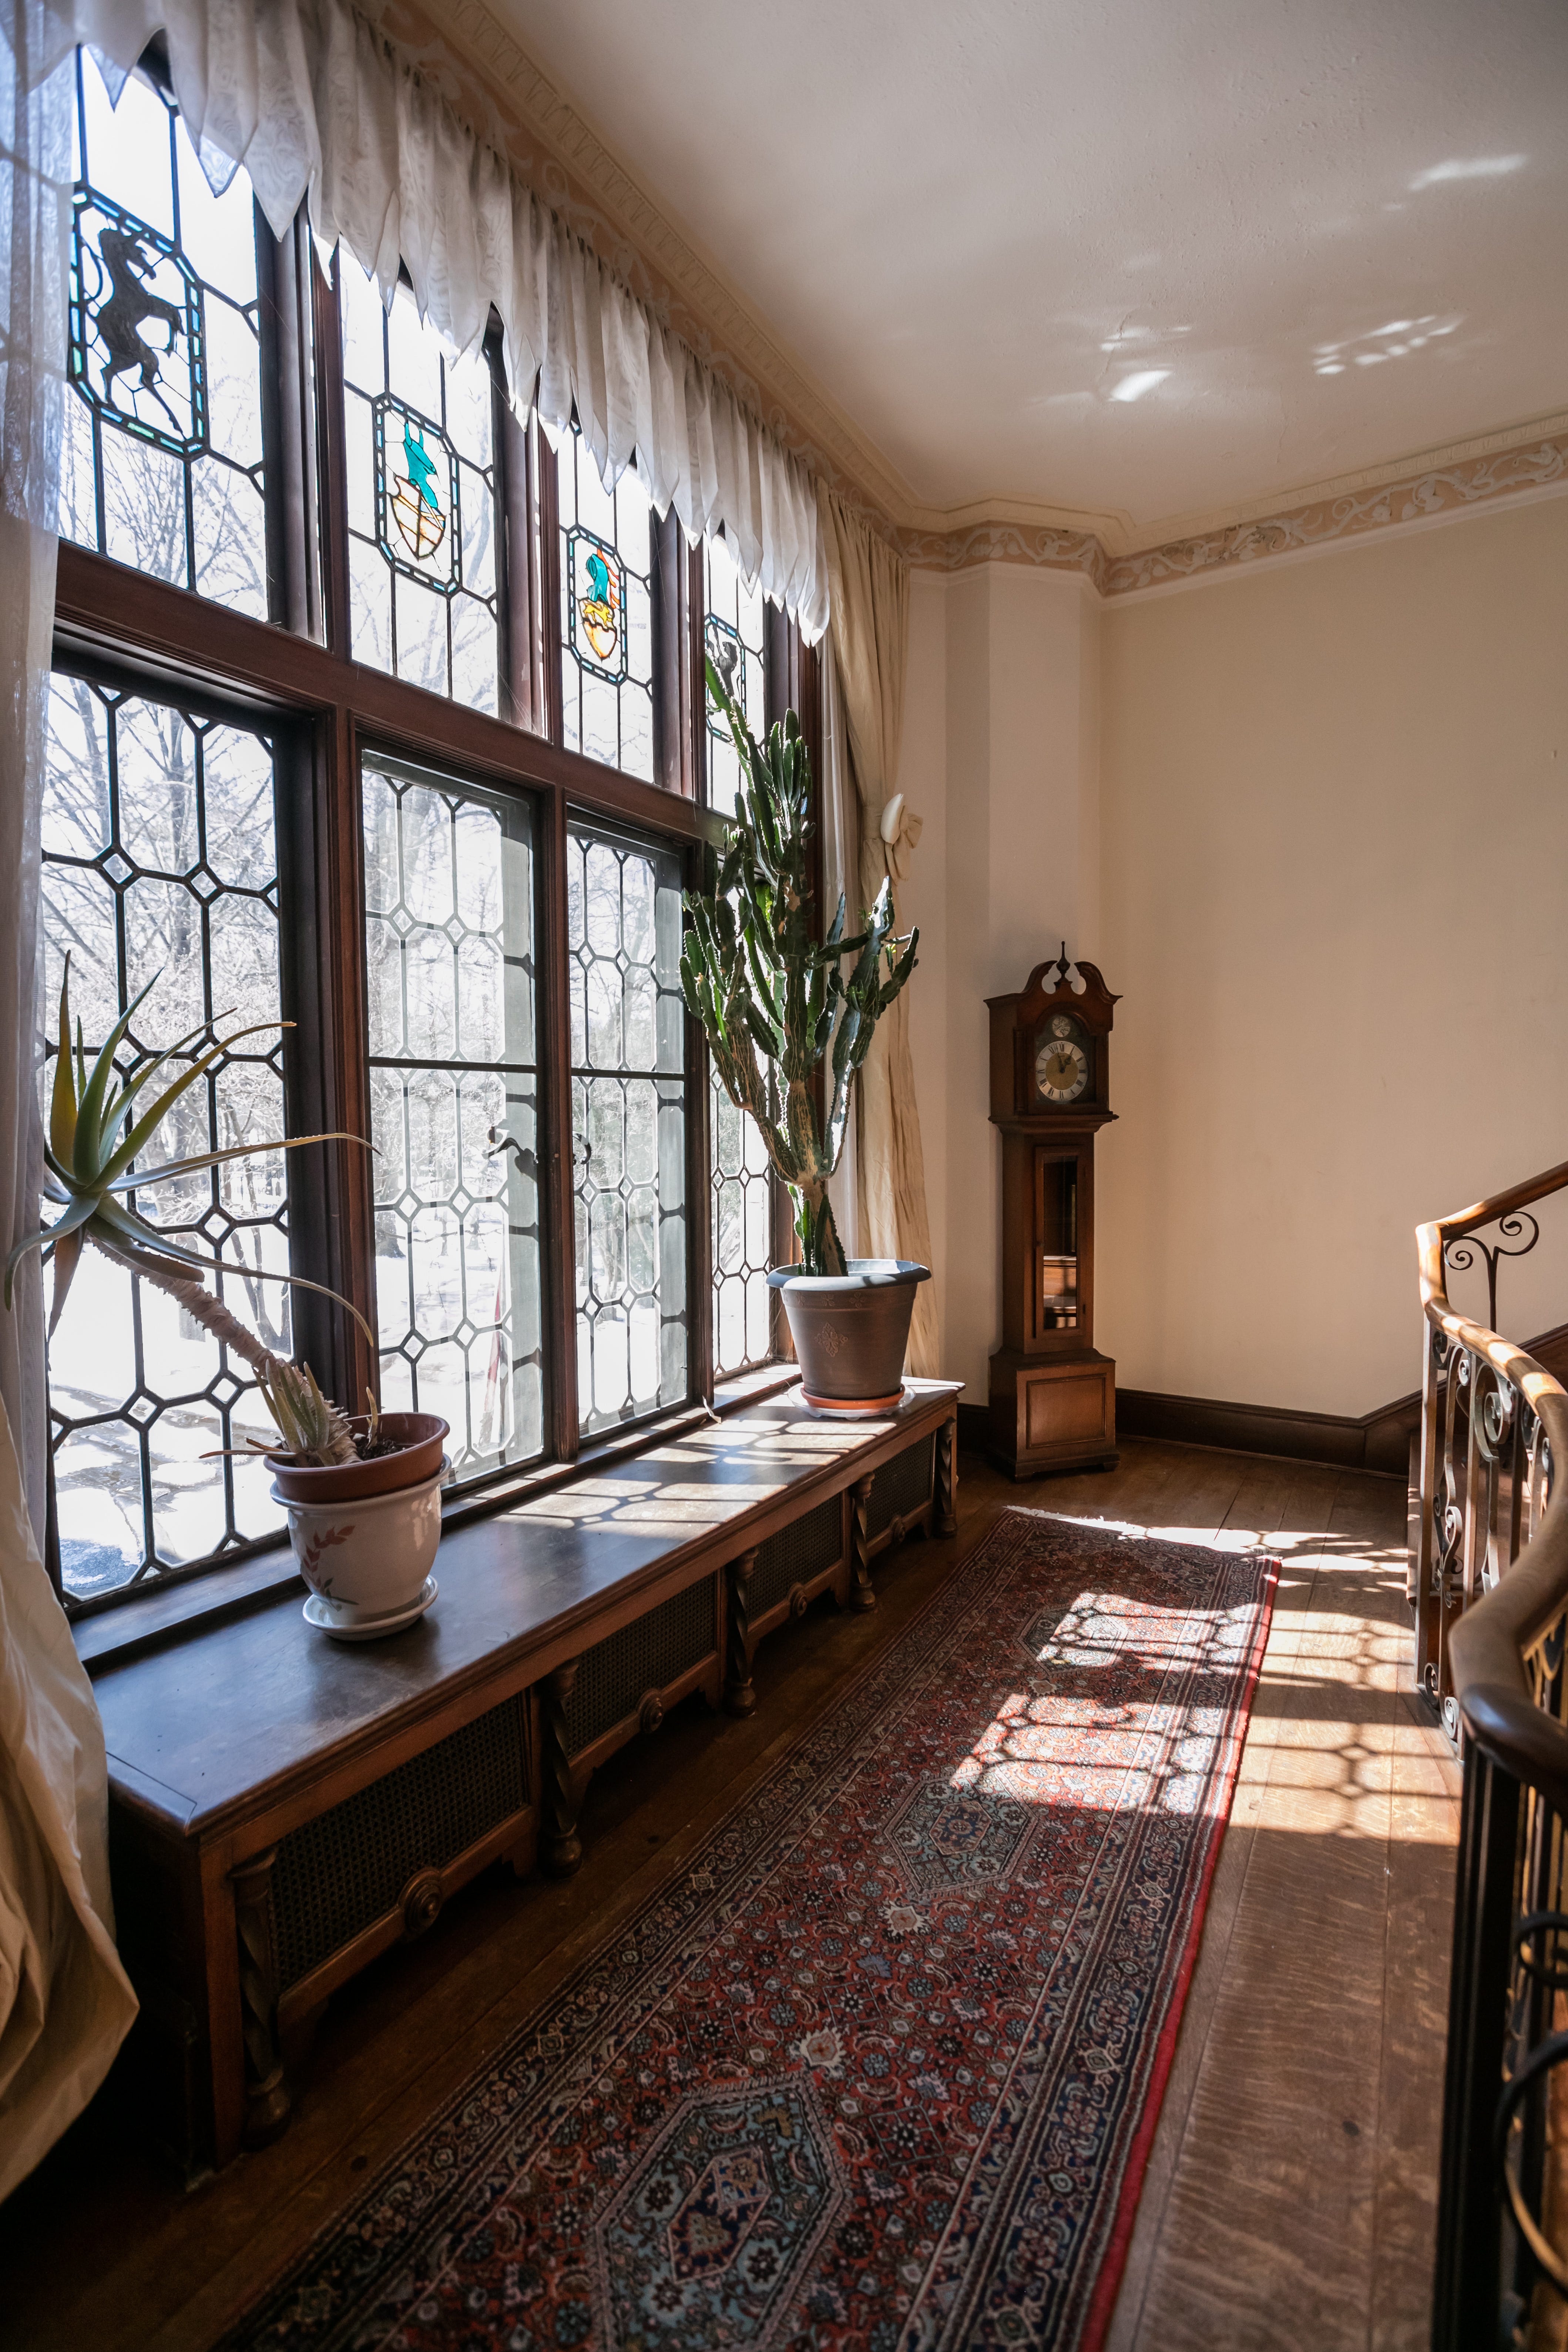 The three-story Tudor-style house, with an asking price of just under a million dollars, includes fine American custom limestone, plaster ceilings throughout, stained glass windows, brick, woodworking and slate.